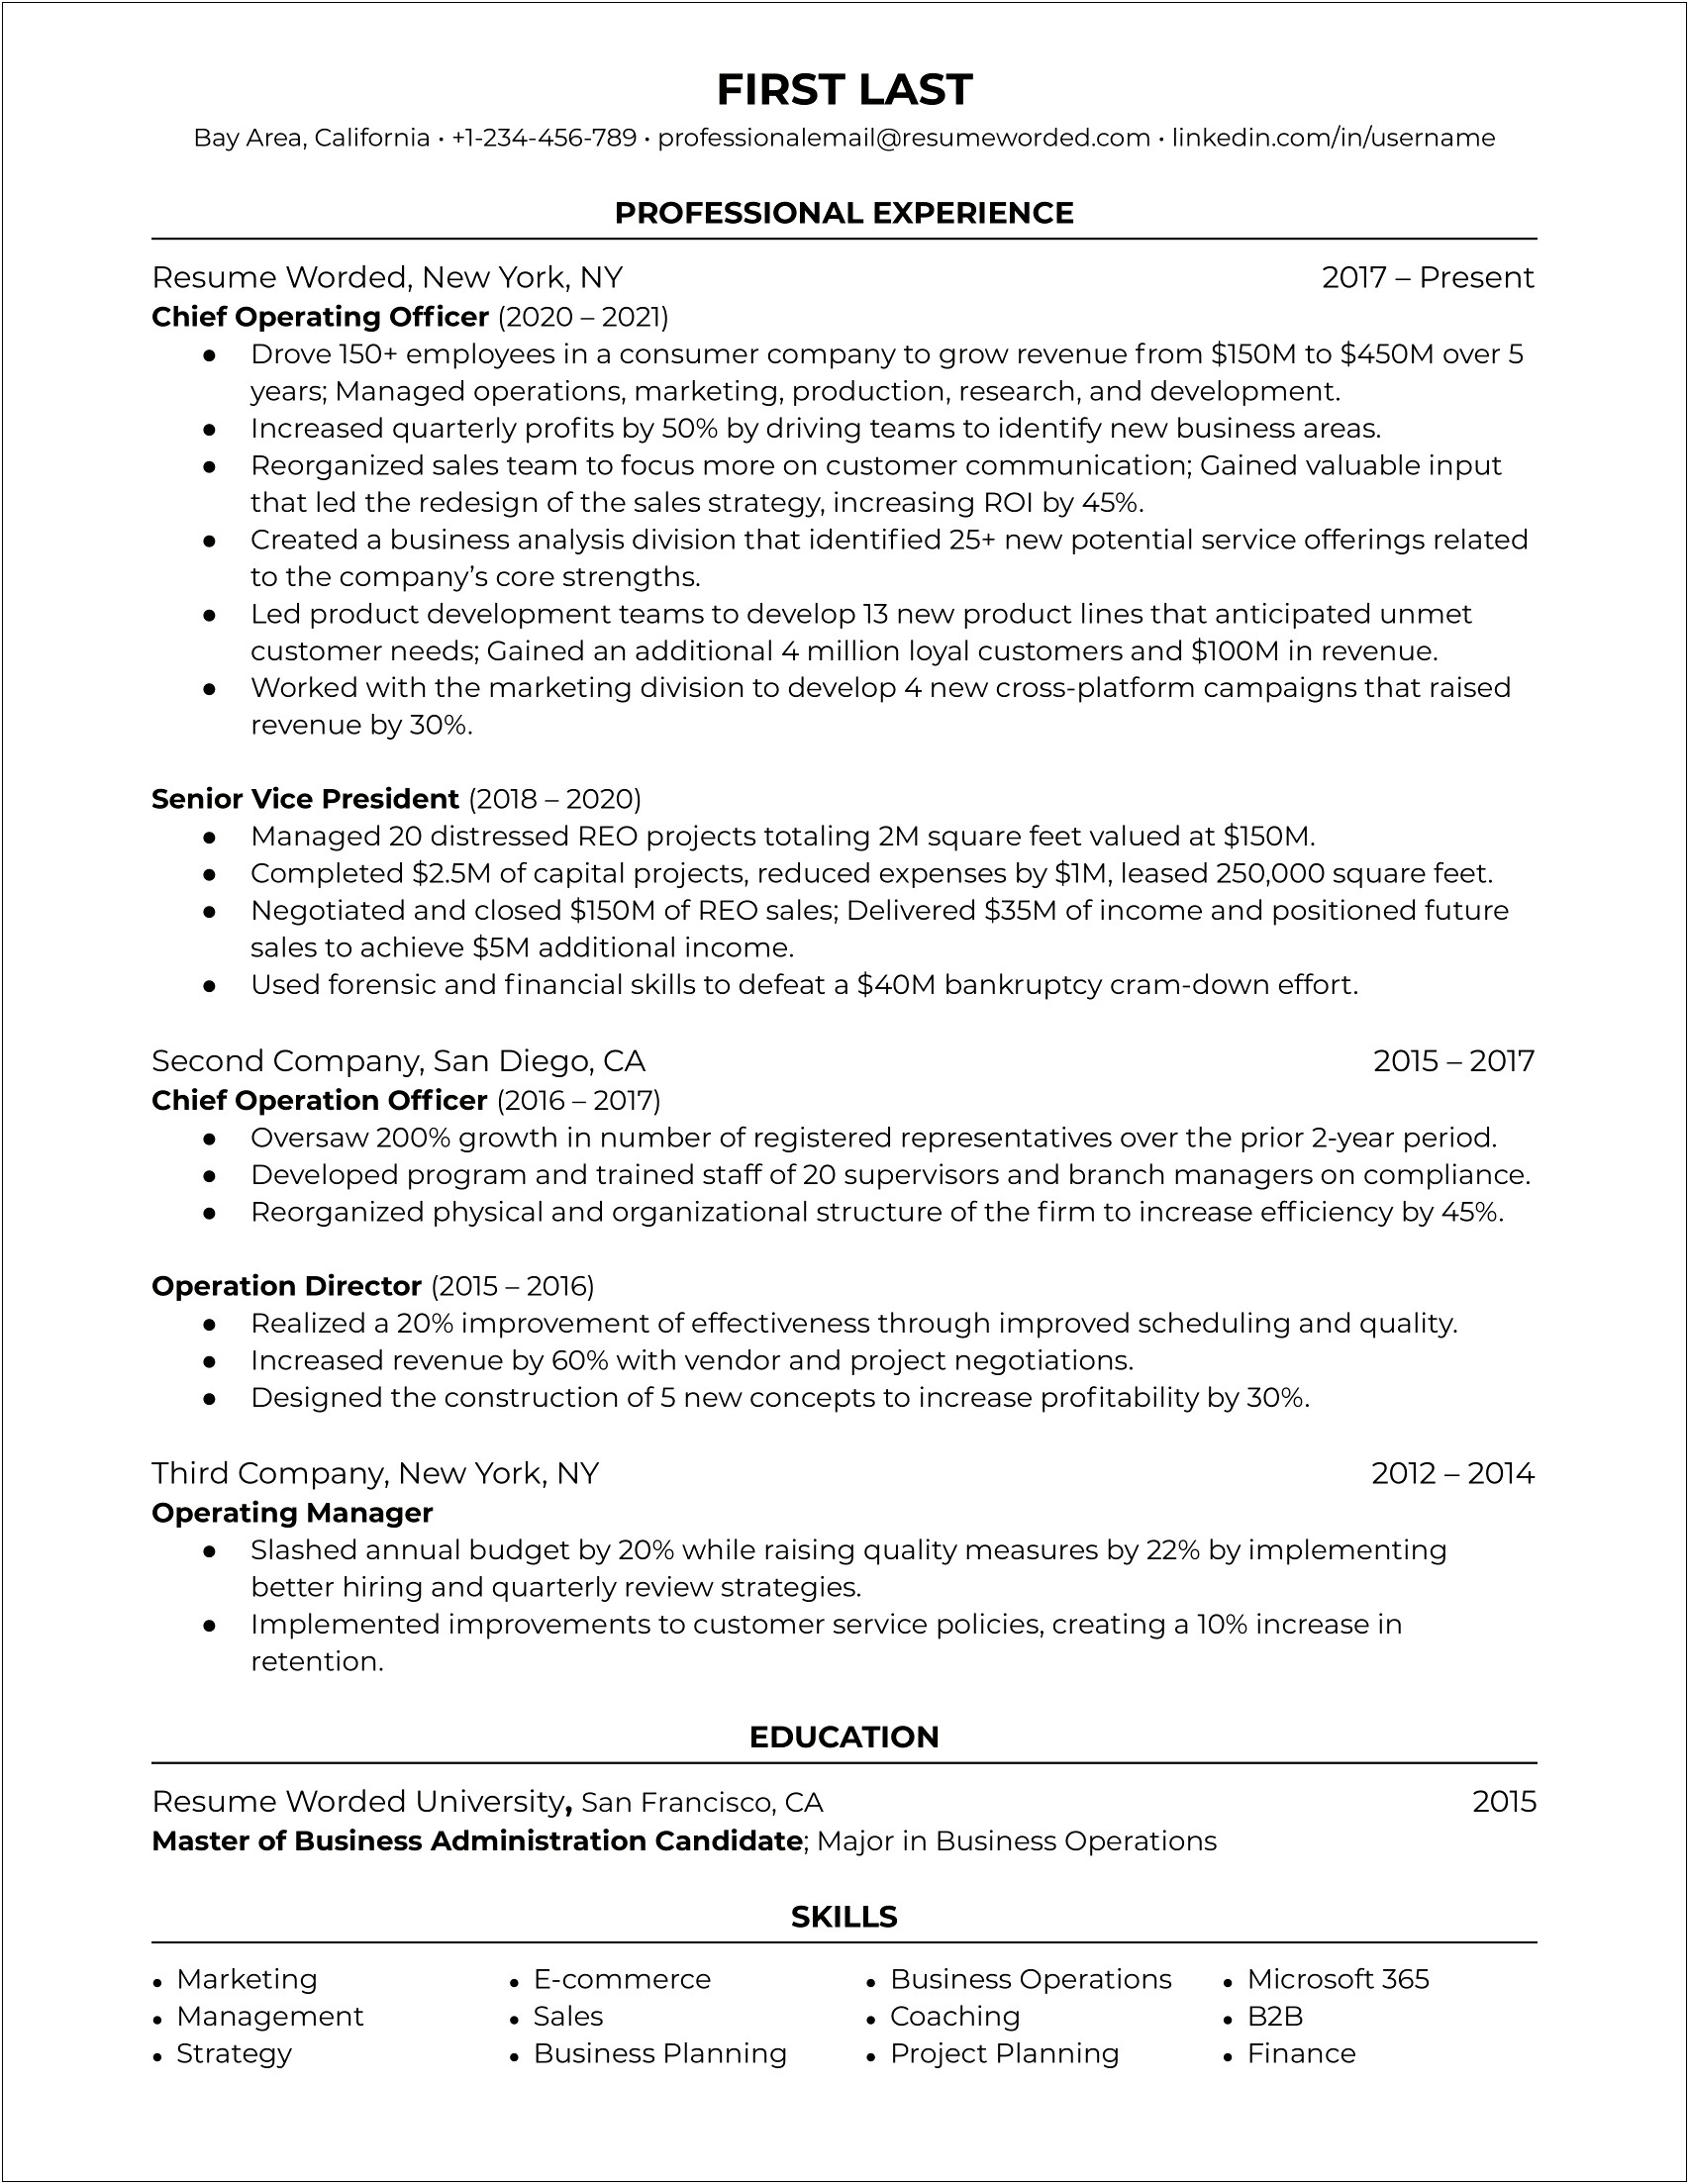 Chief Operating Officer Resume Samples